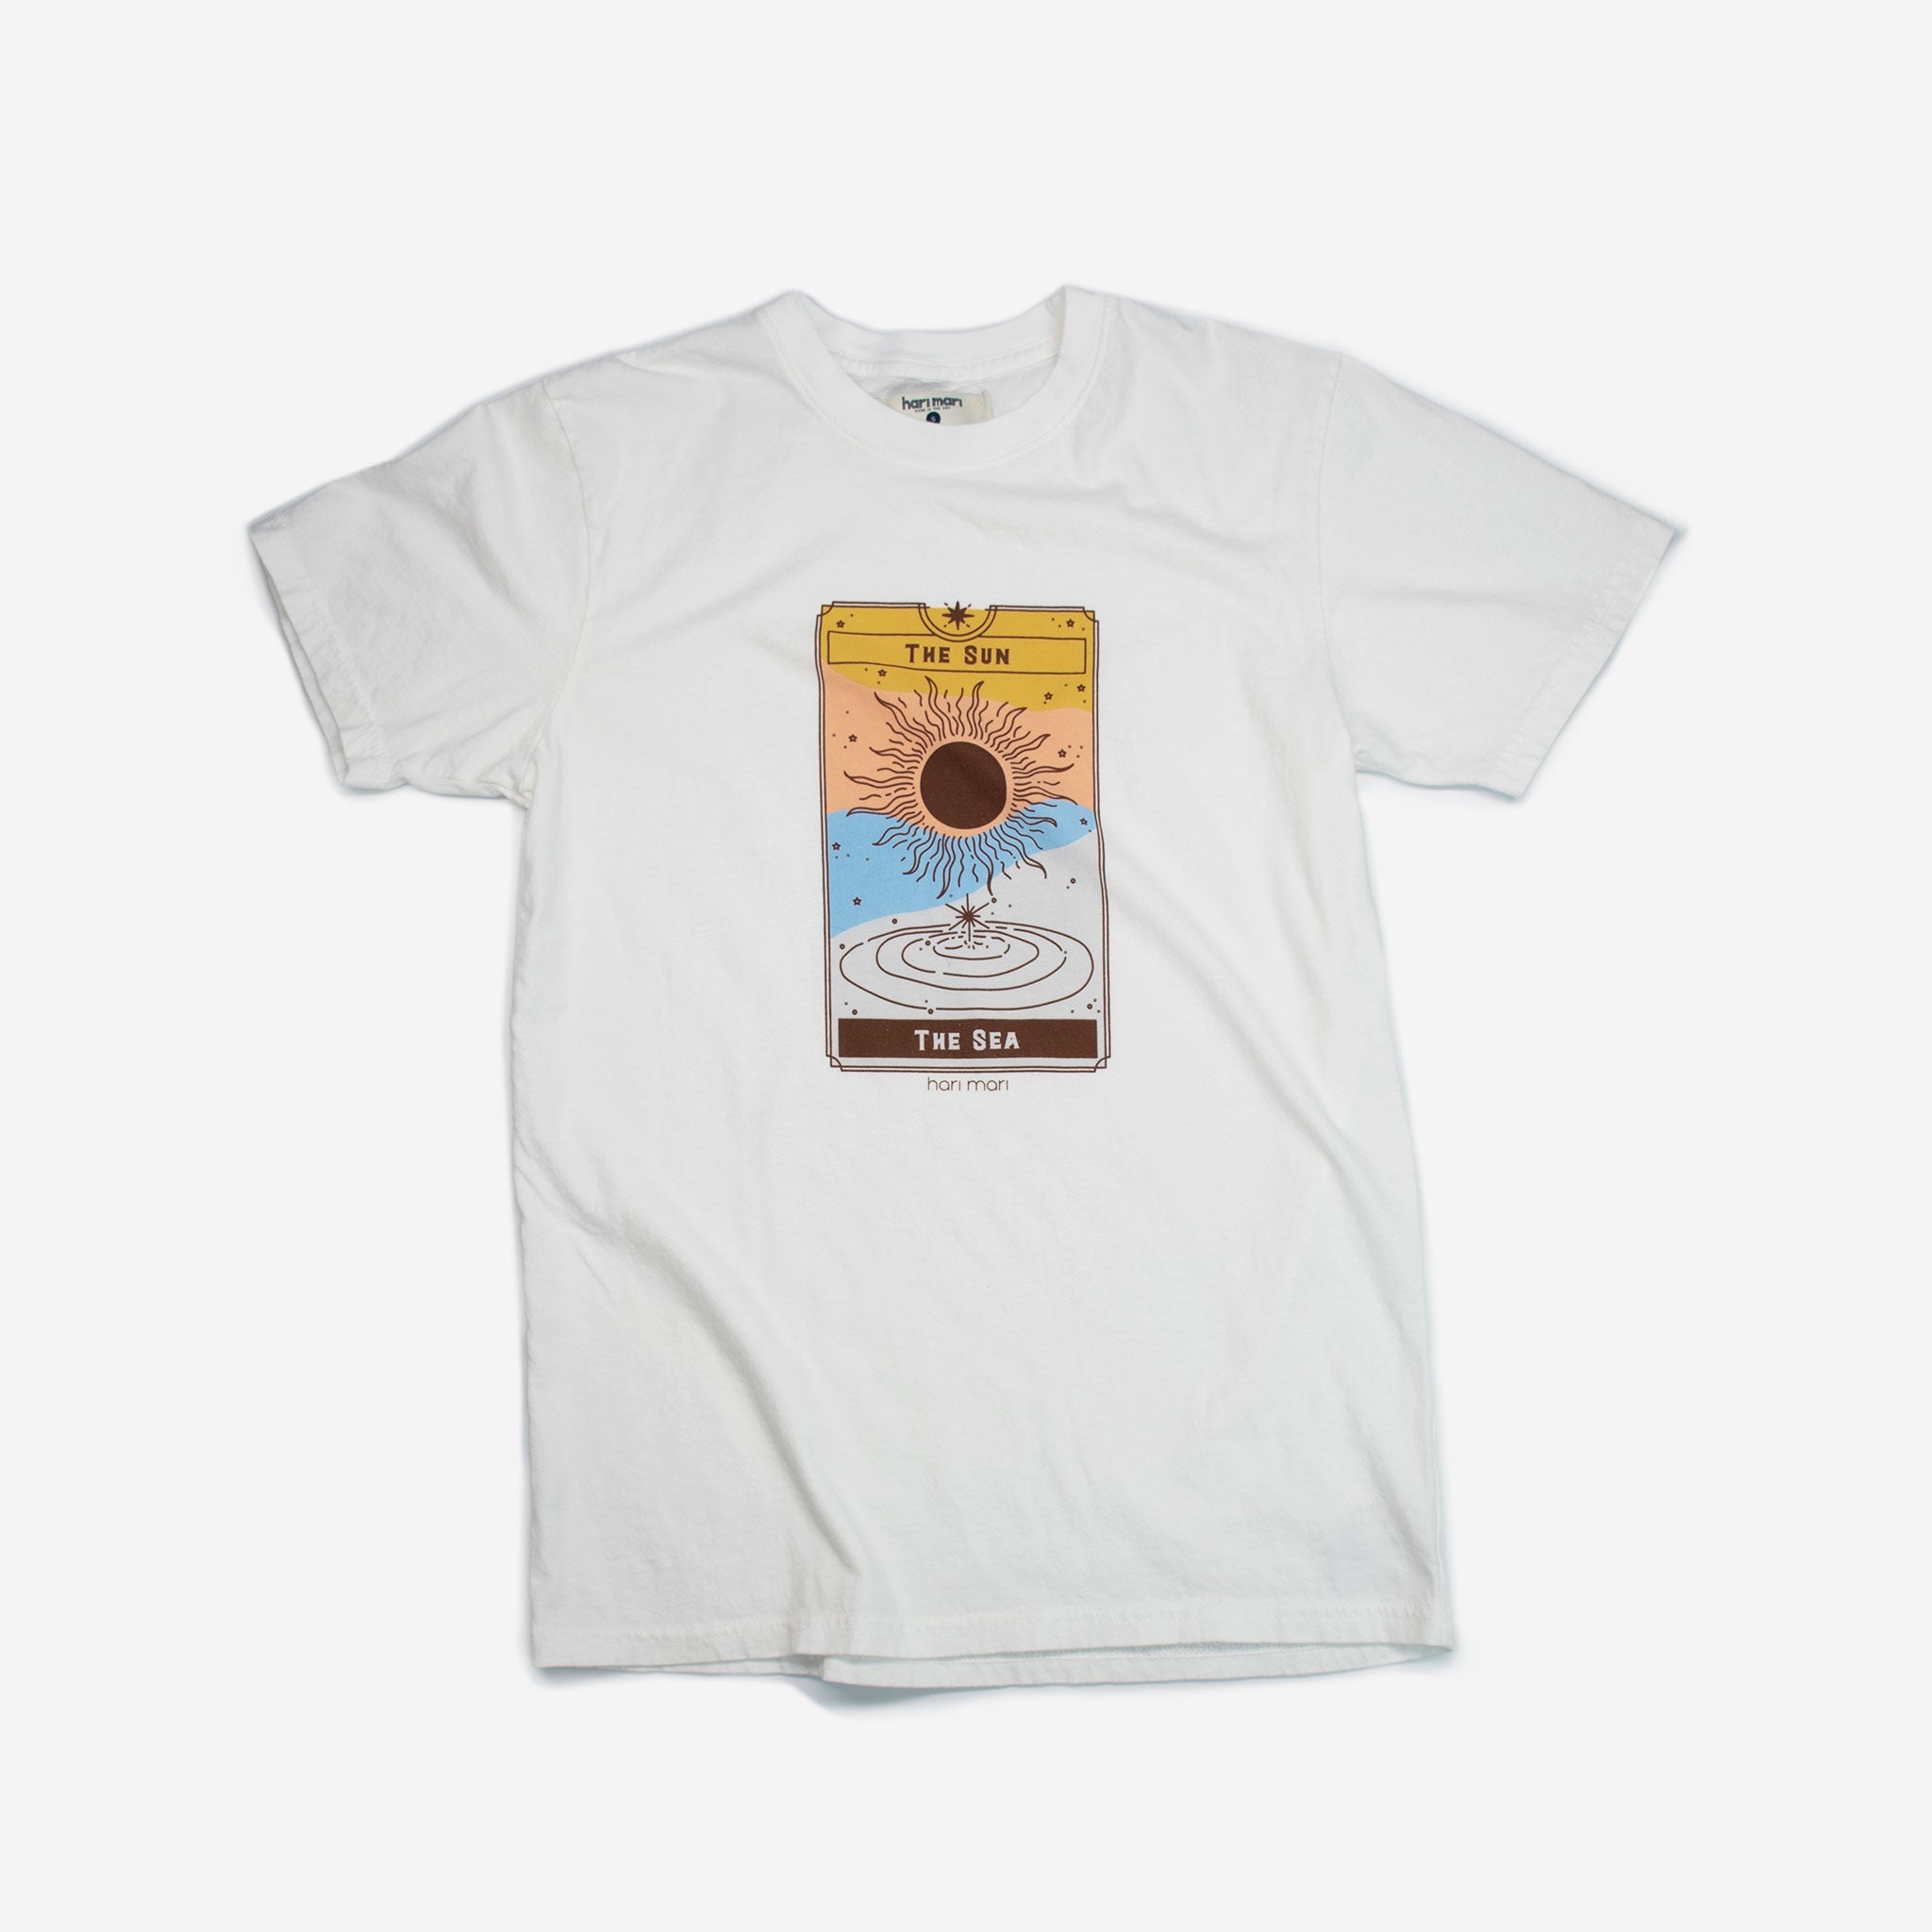 white tee shirt with colorful chest graphic